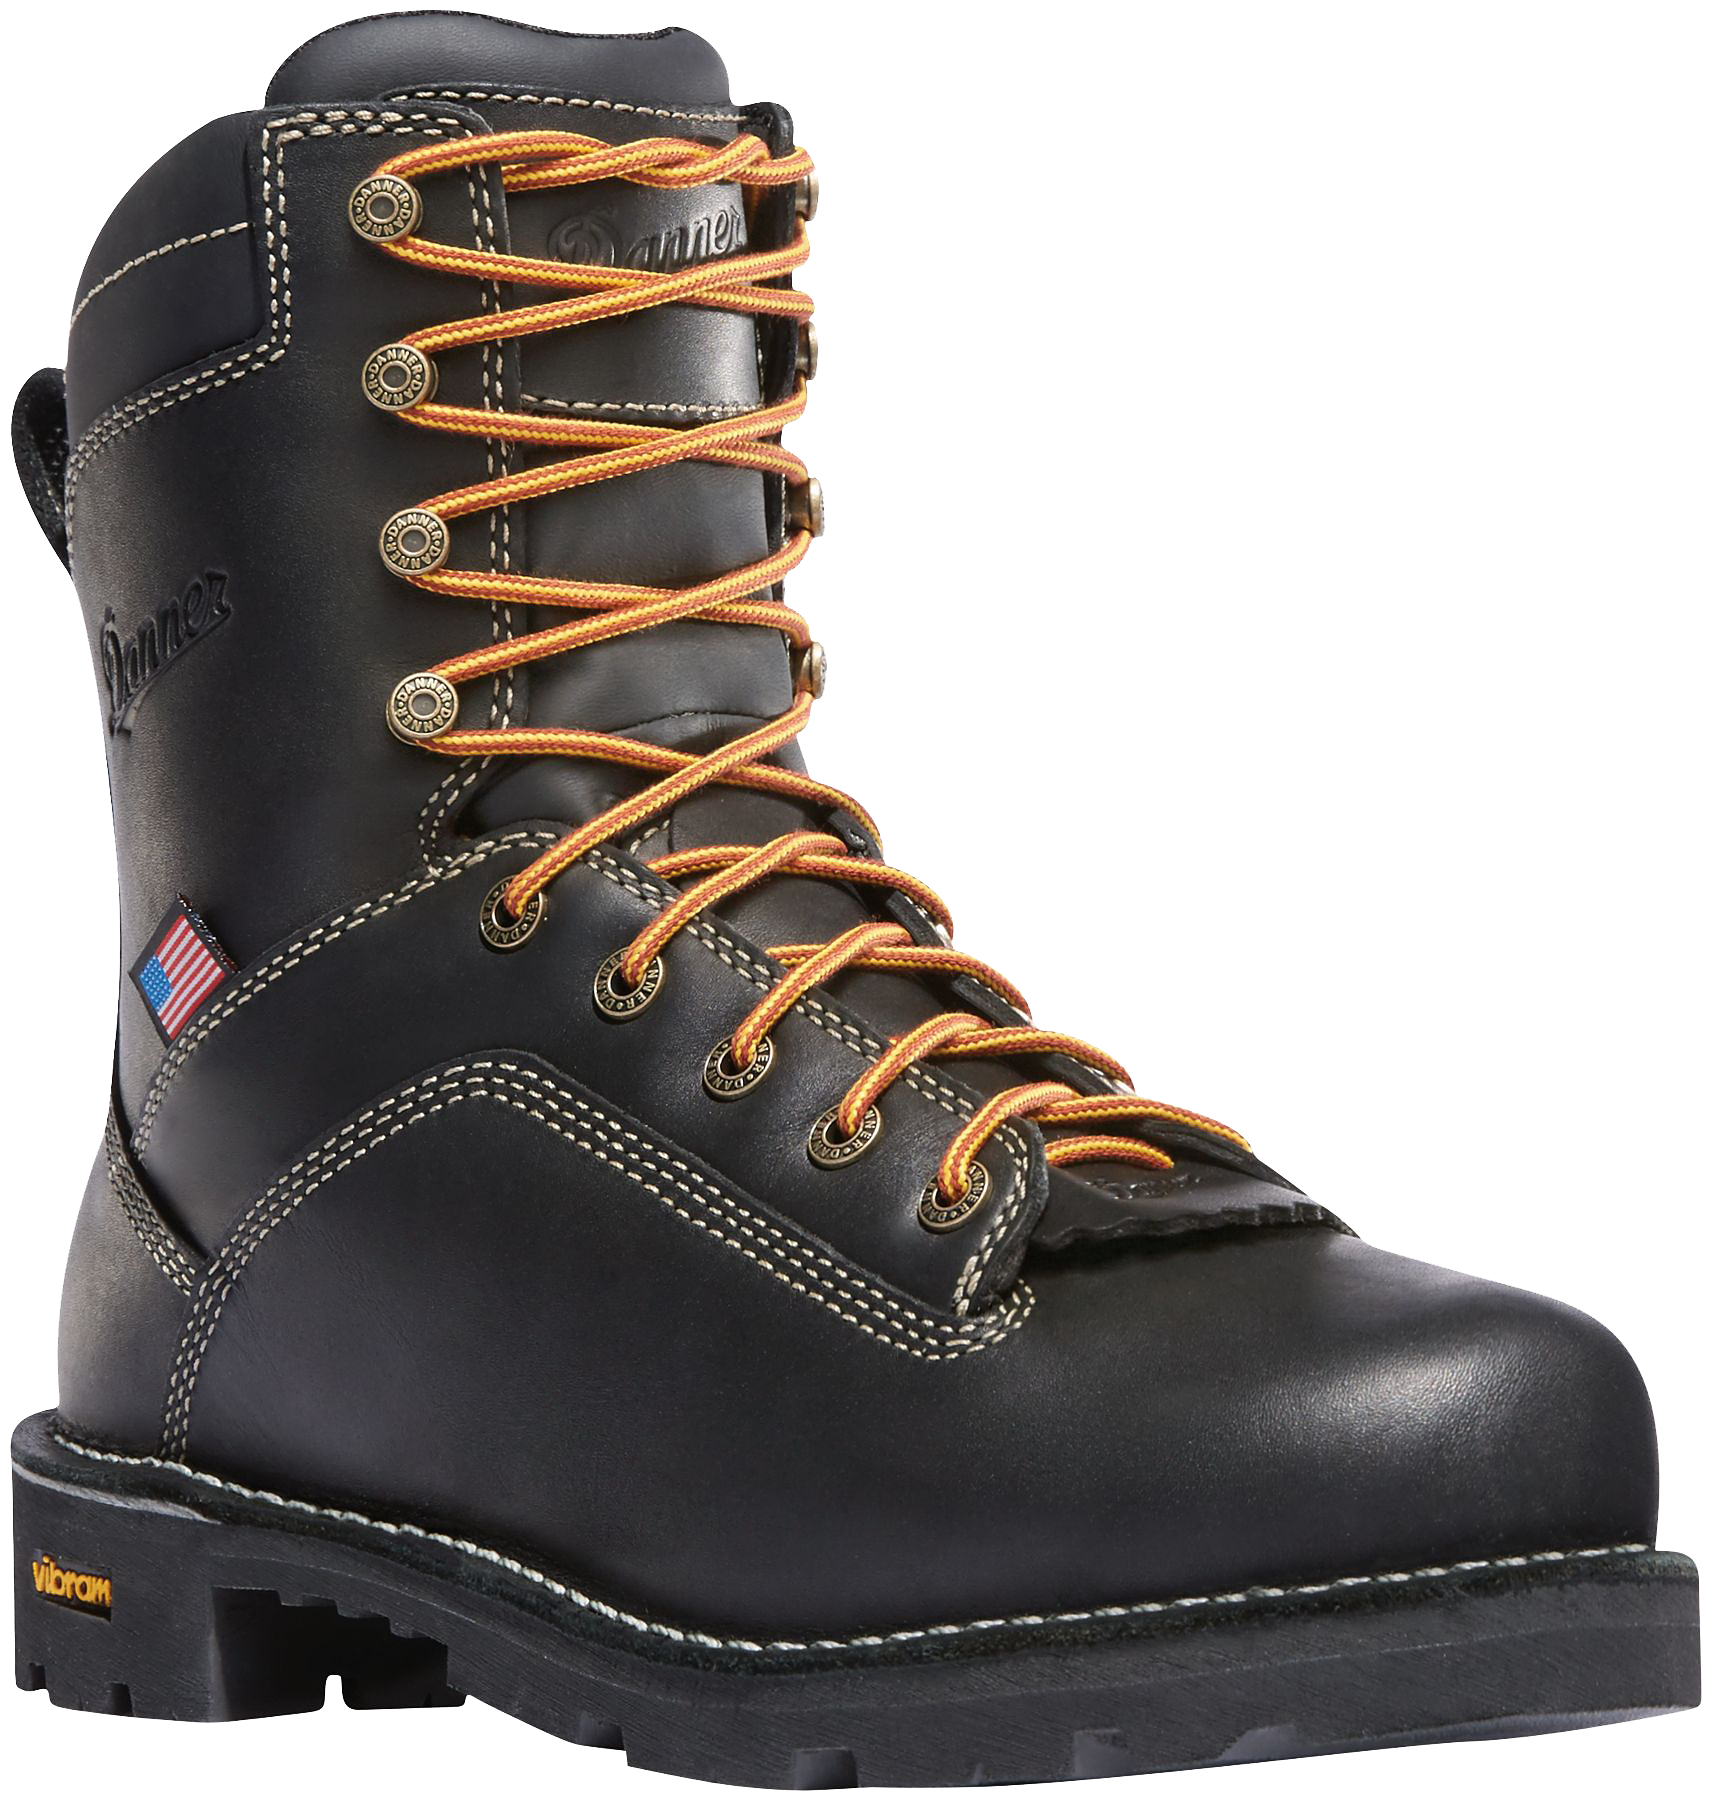 Danner Quarry USA Brown GORE-TEX Alloy Toe Work Boots for Men - Black - 7W